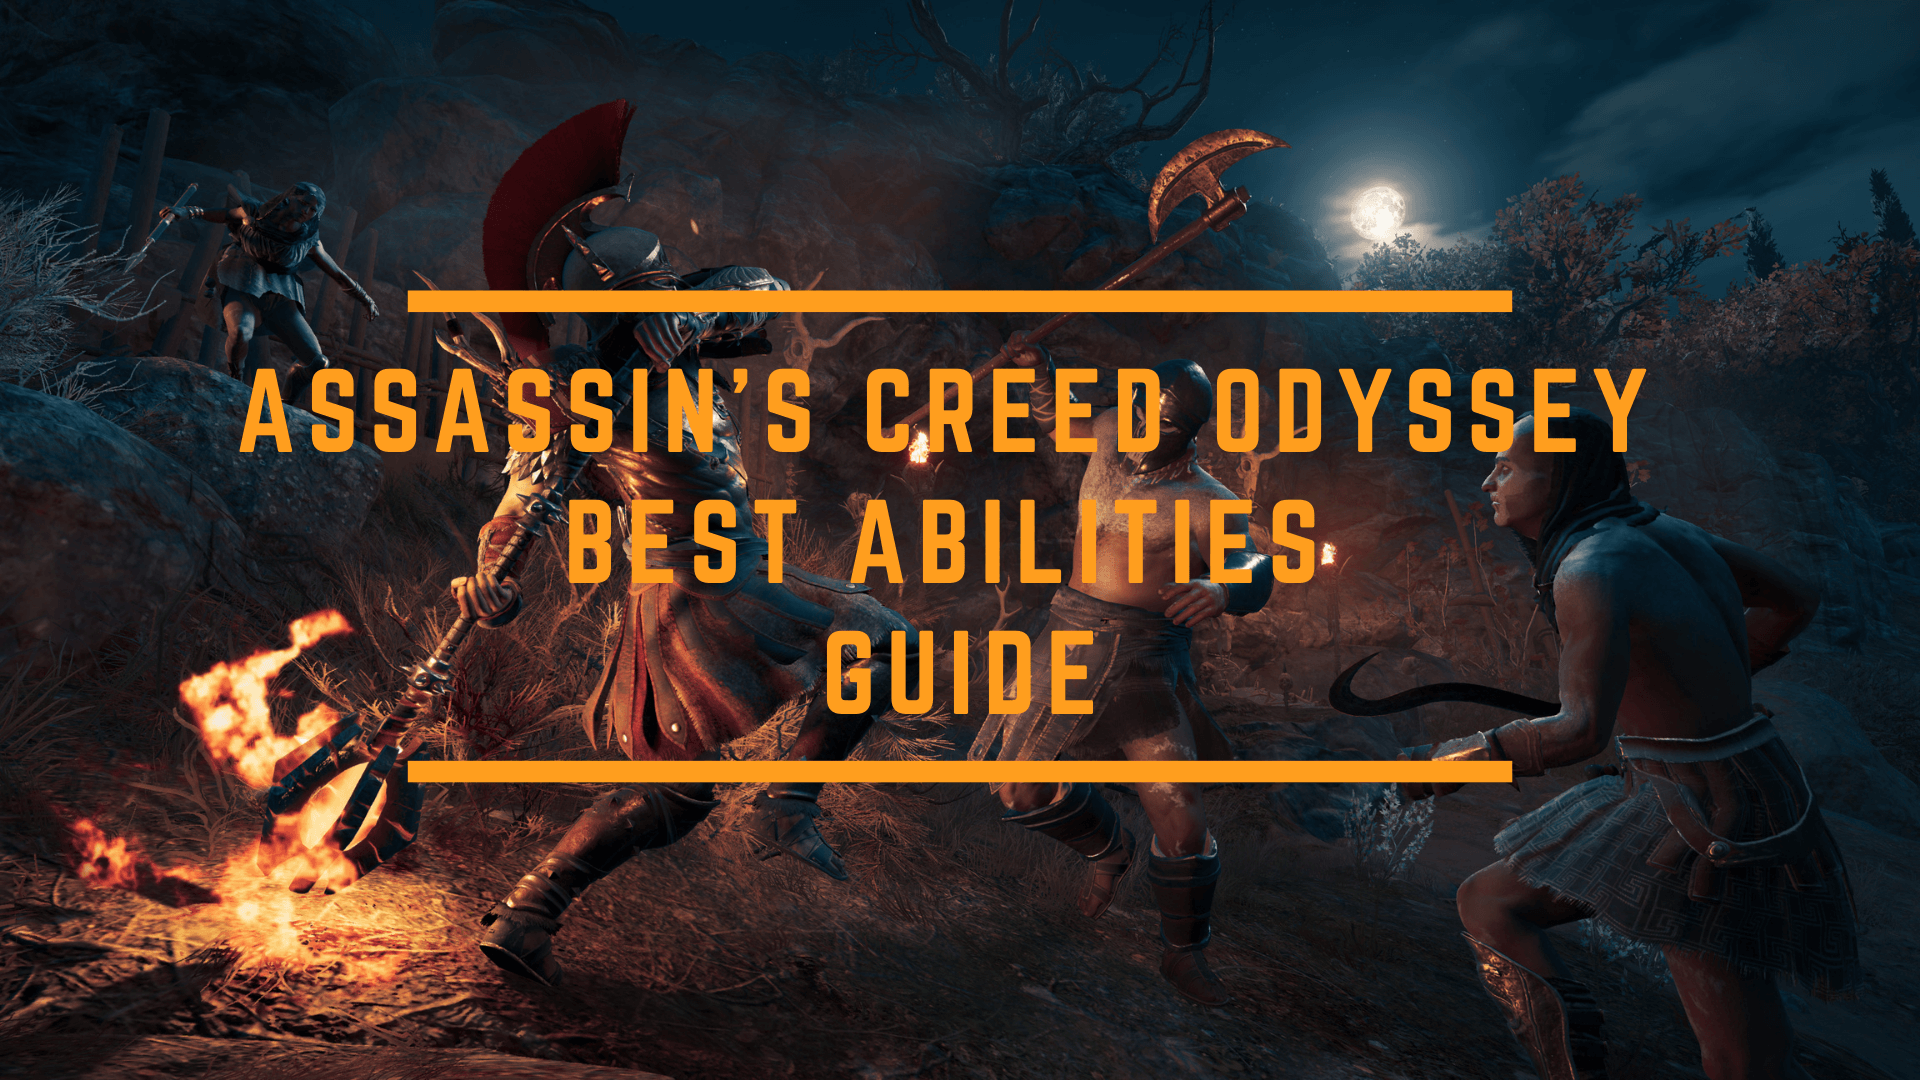 Assassin’s Creed Odyssey Best Abilities